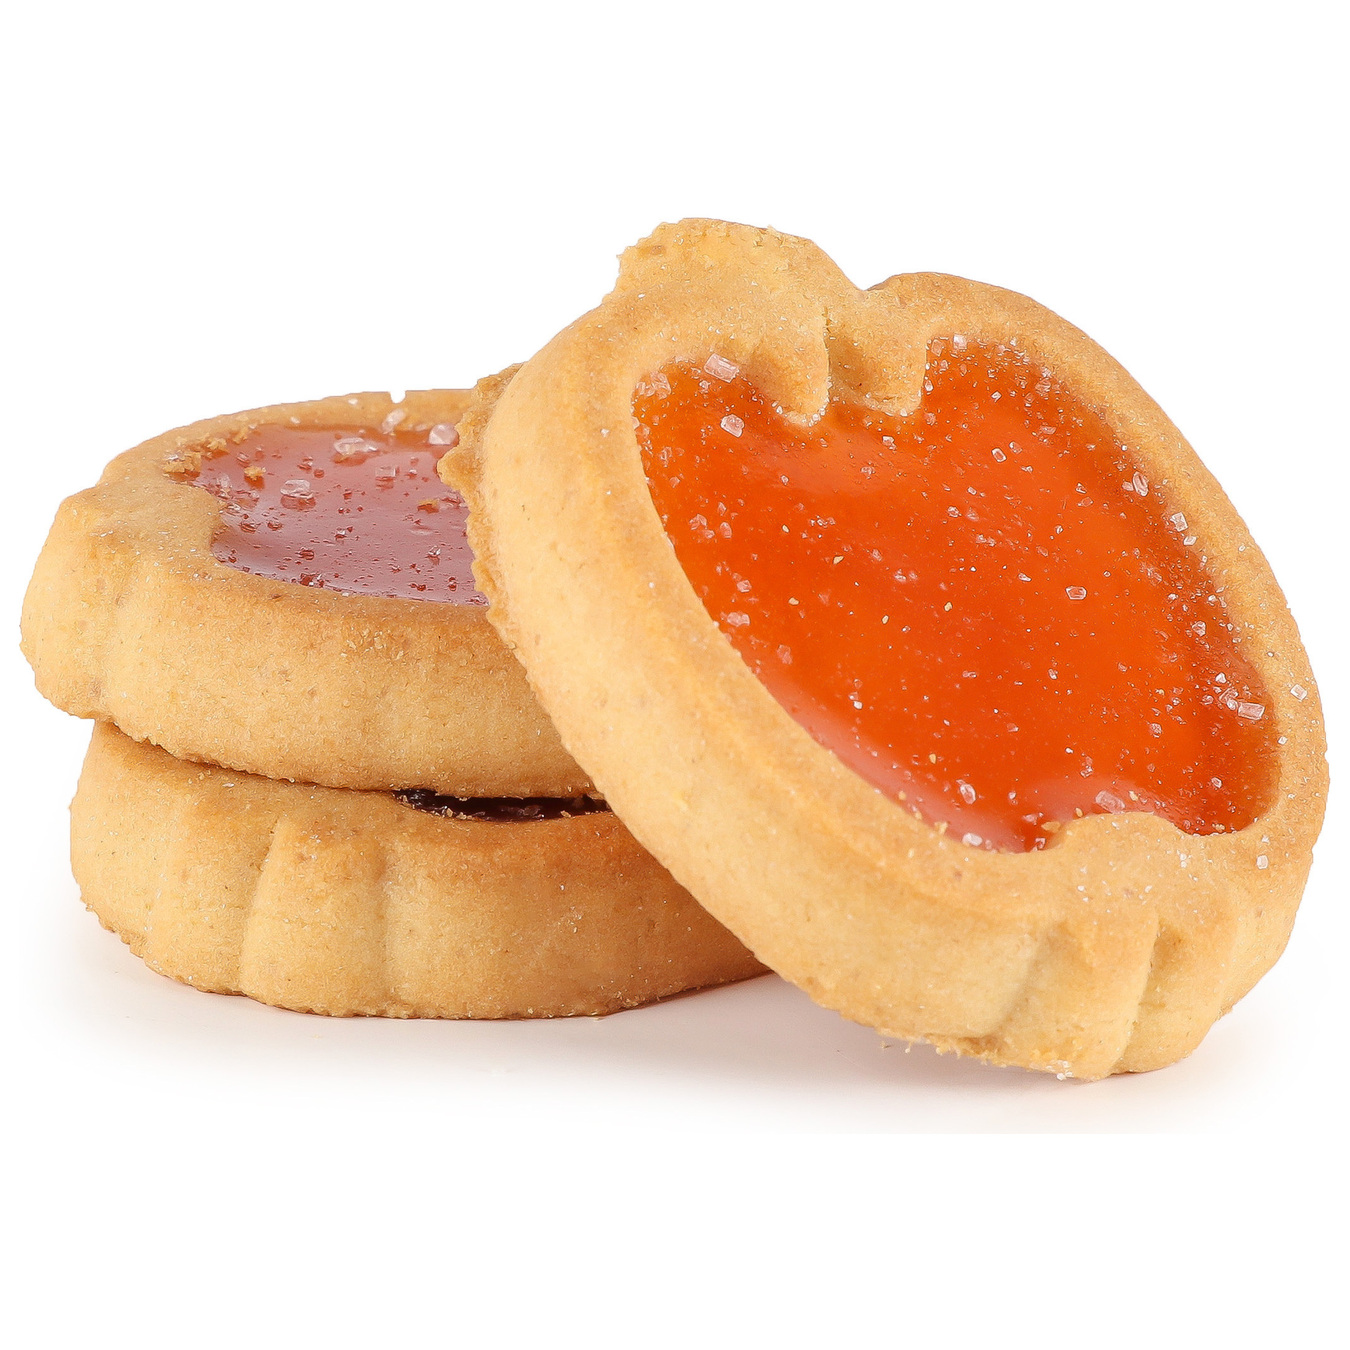 Cookies Delicia buttery paradise apples orange flavor 400g 2